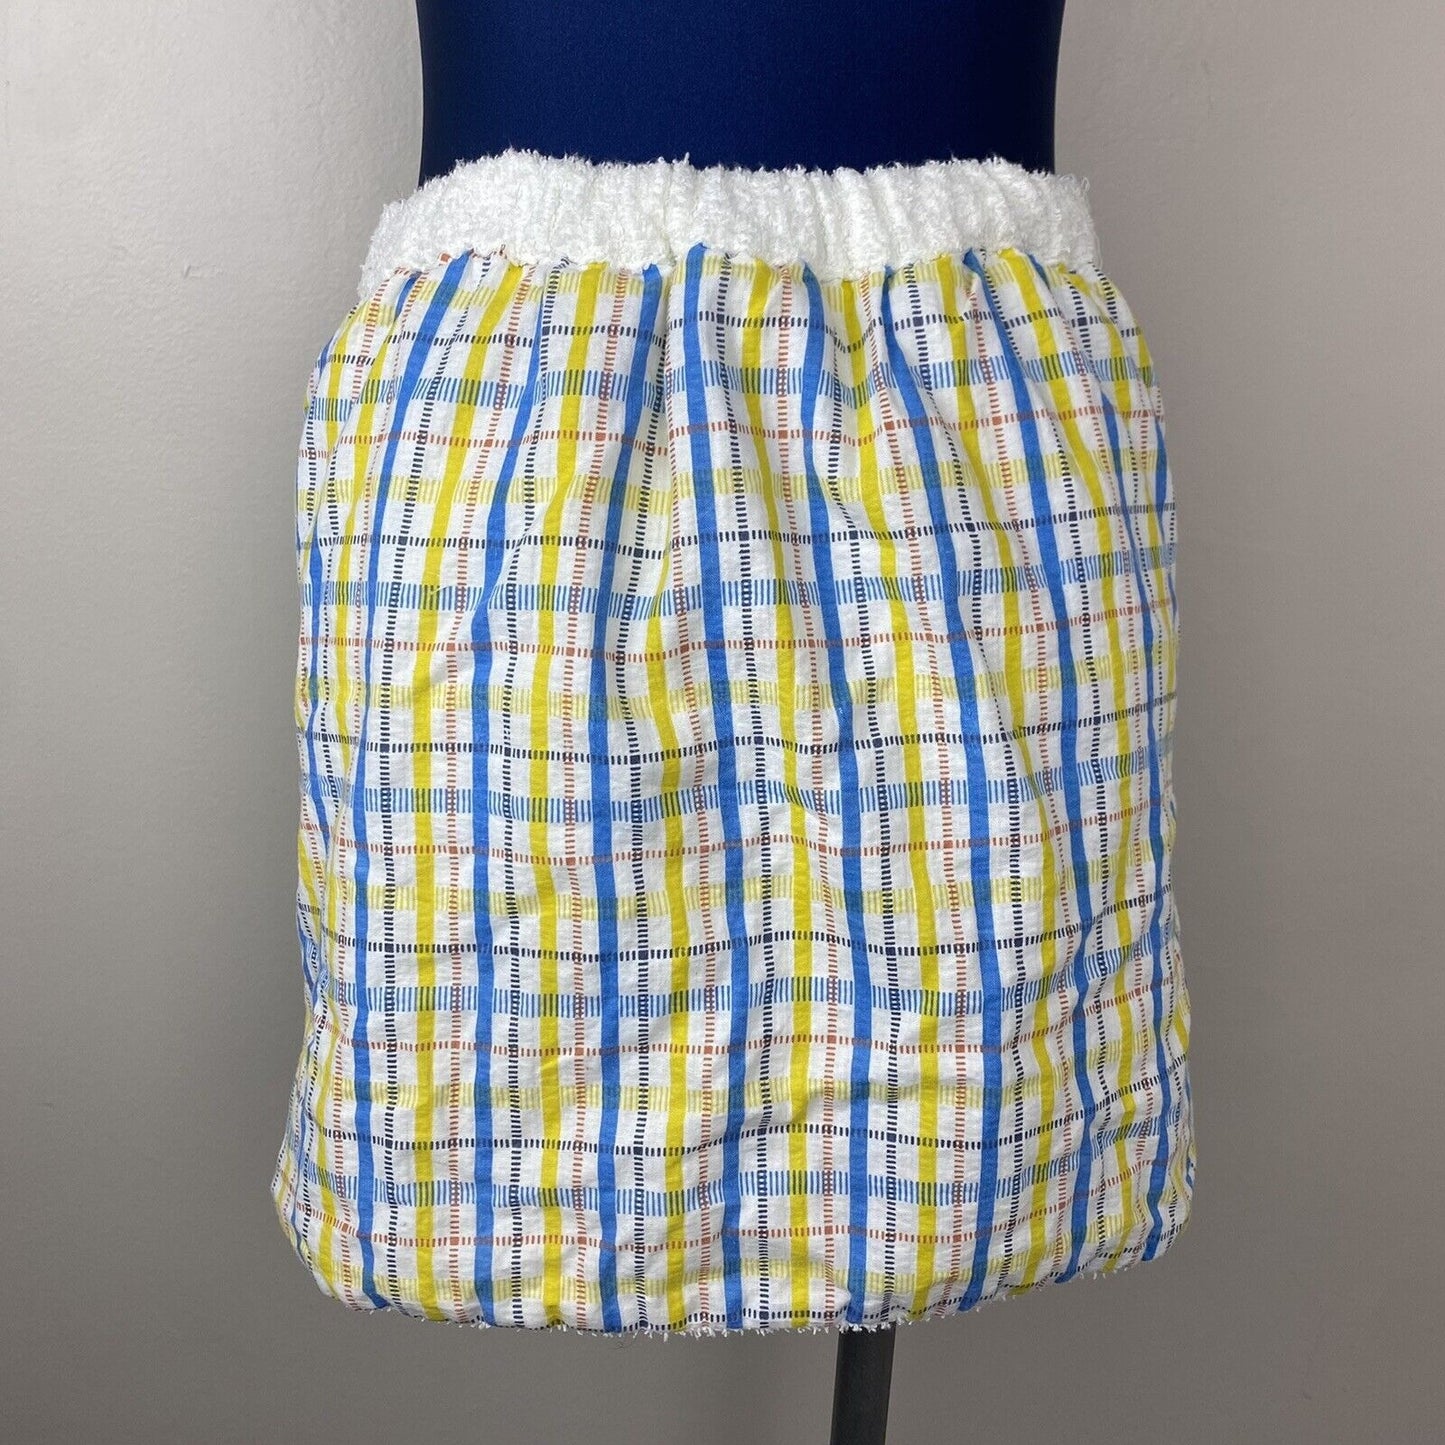 1970s Pleetway Towel Lined Plaid Beach Kilt, Swimsuit Cover Up, Terrycloth Wrap